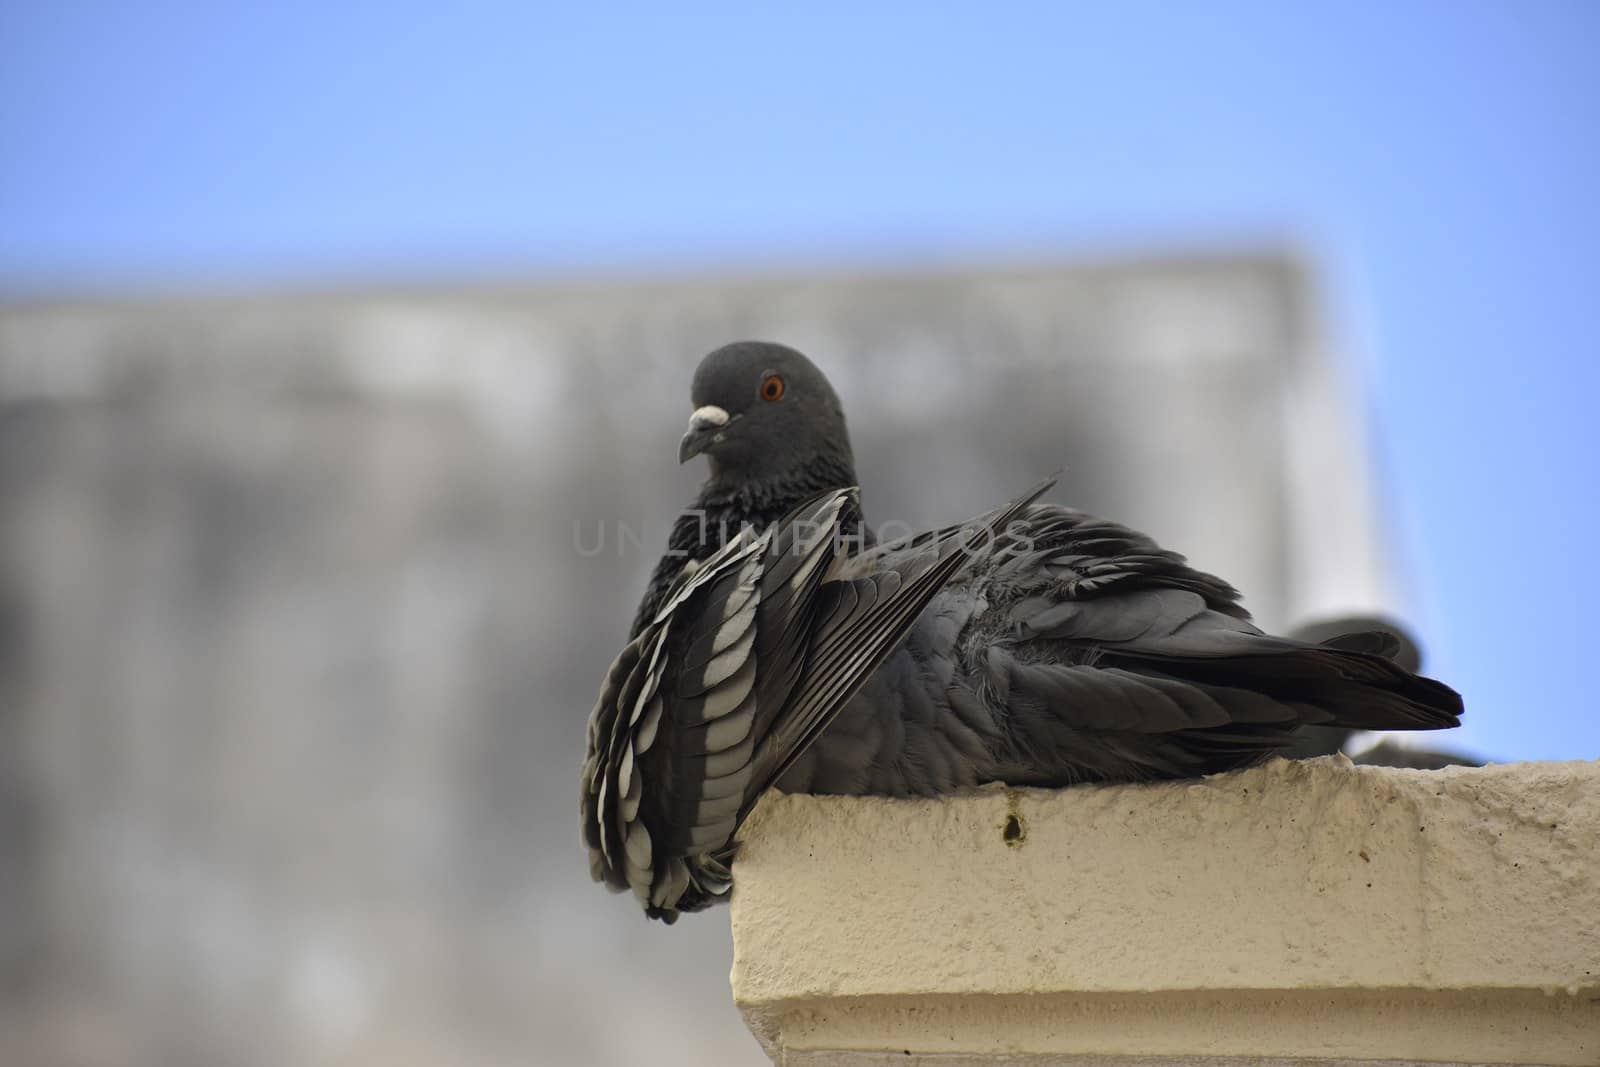 A pigeon siting on wall of my roof